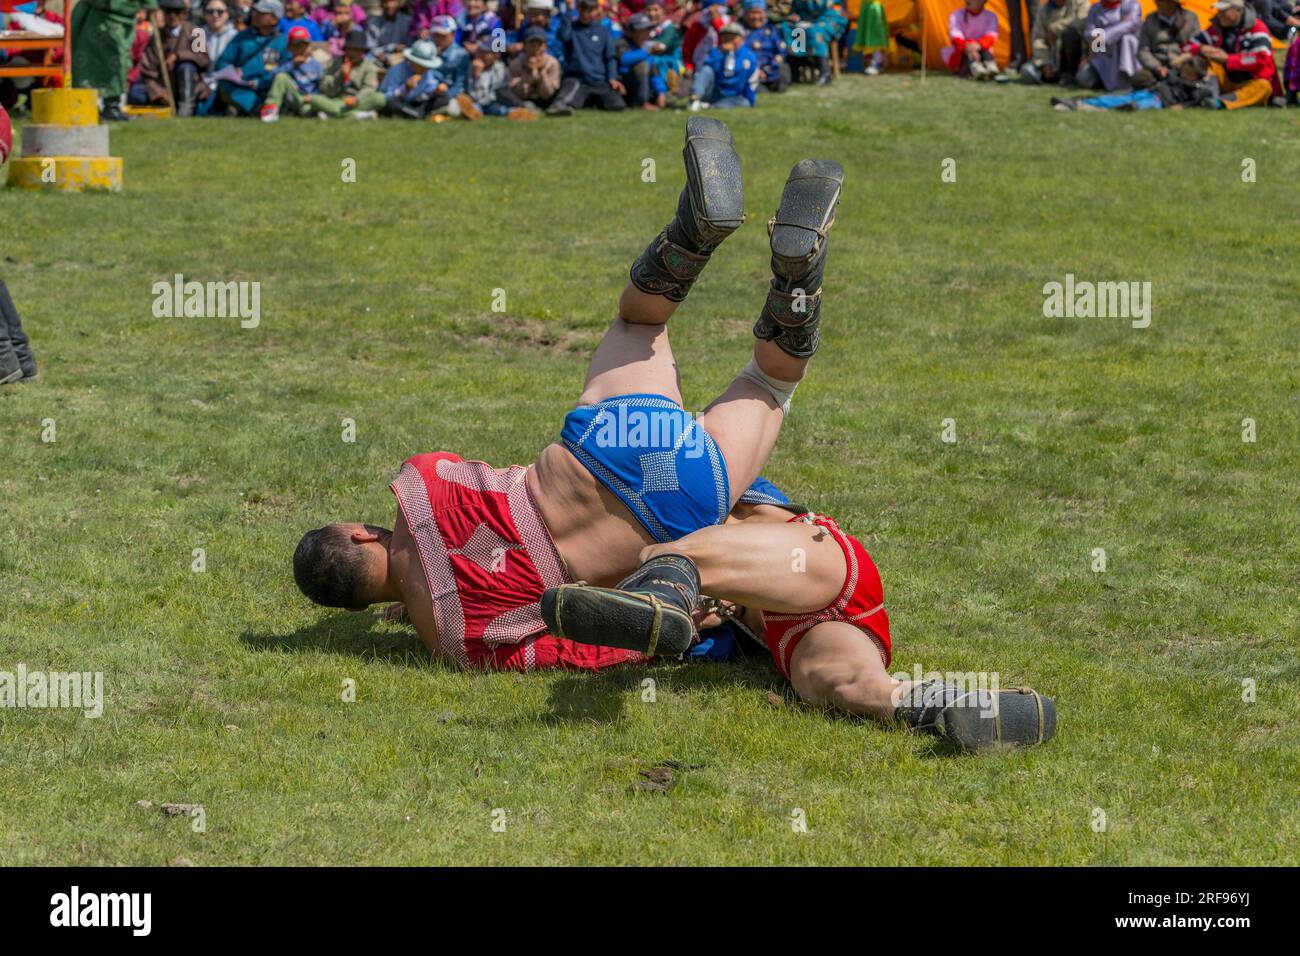 The Mongolian traditional wrestling event (is an untimed competition in which wrestlers lose if they touch the ground with any part of their body othe Stock Photo